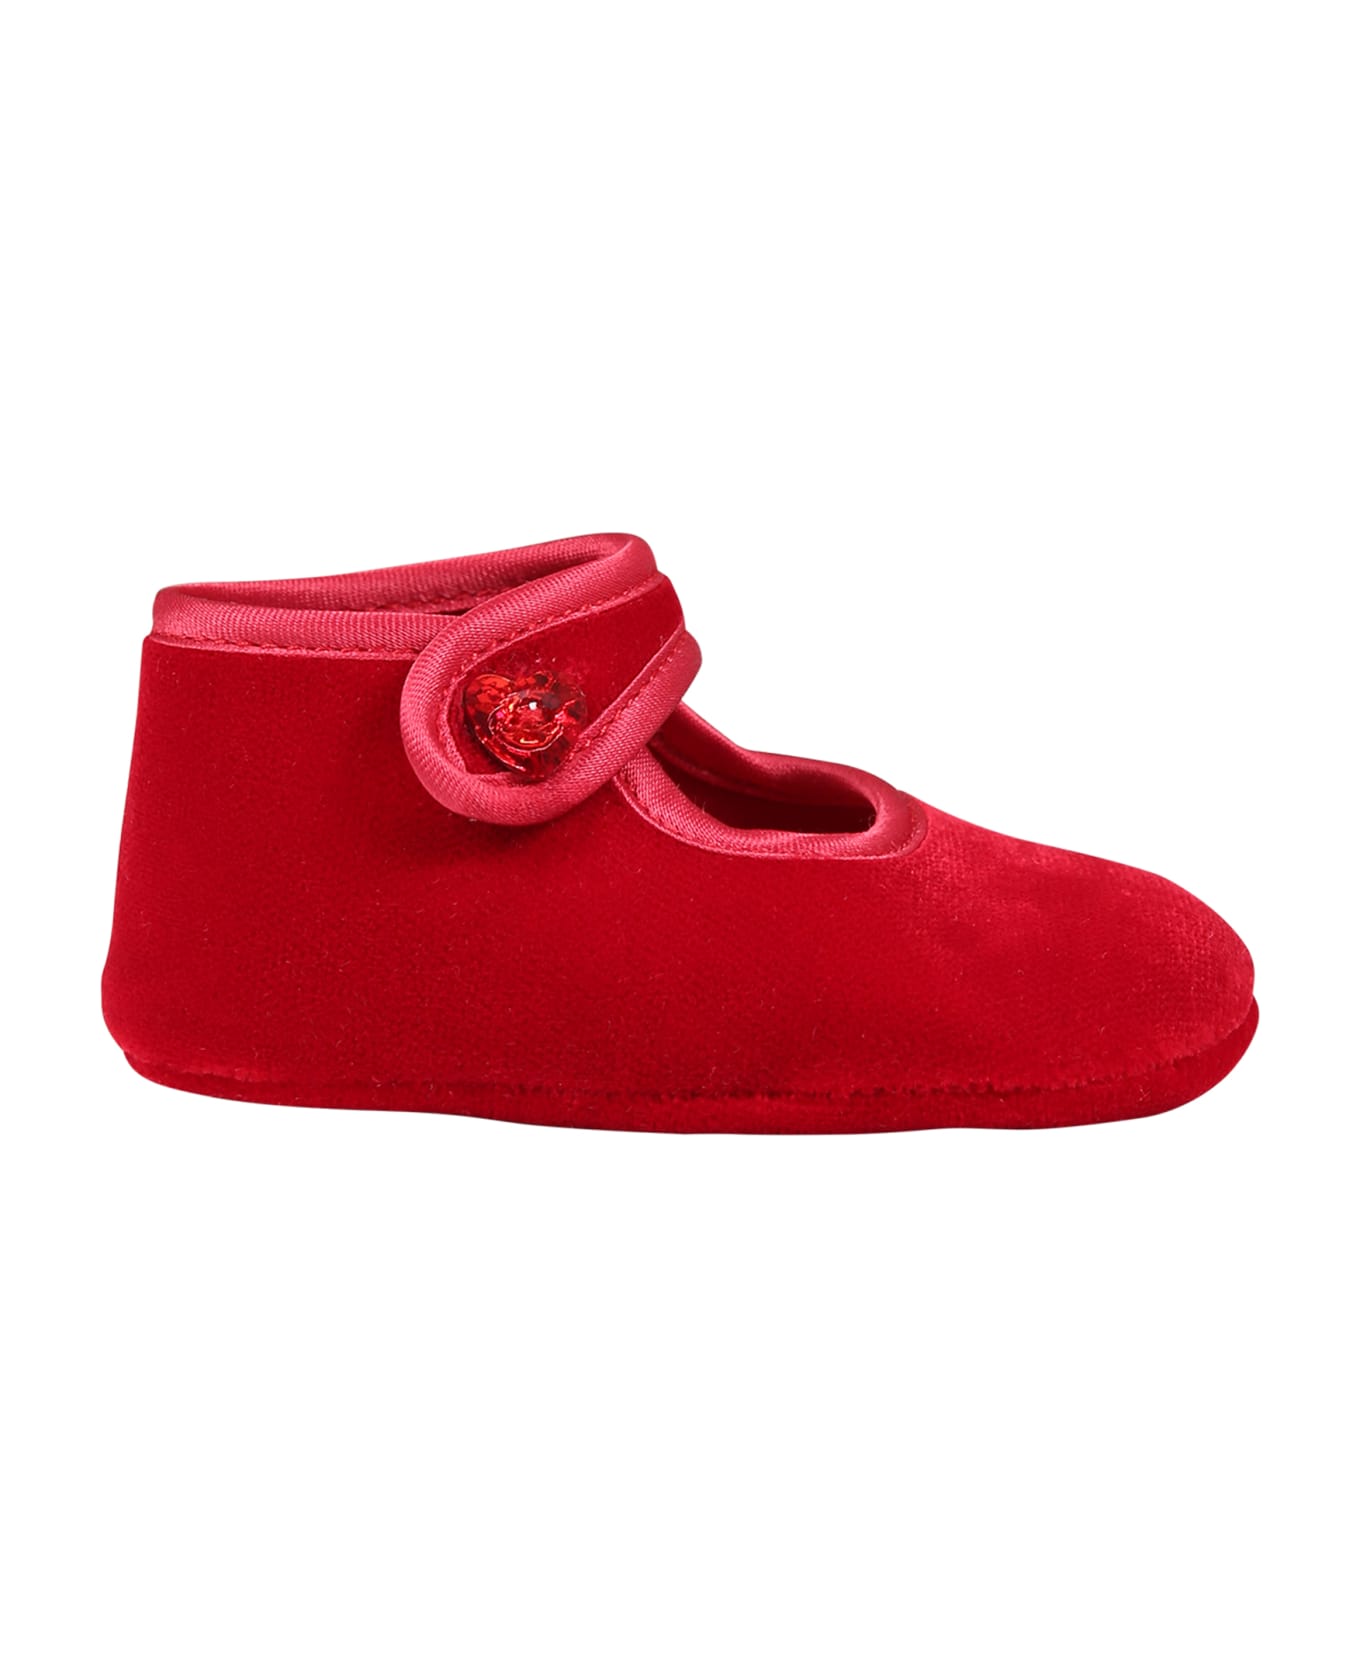 Monnalisa Red Flat Shoes For Baby Girl With Hearts - Red